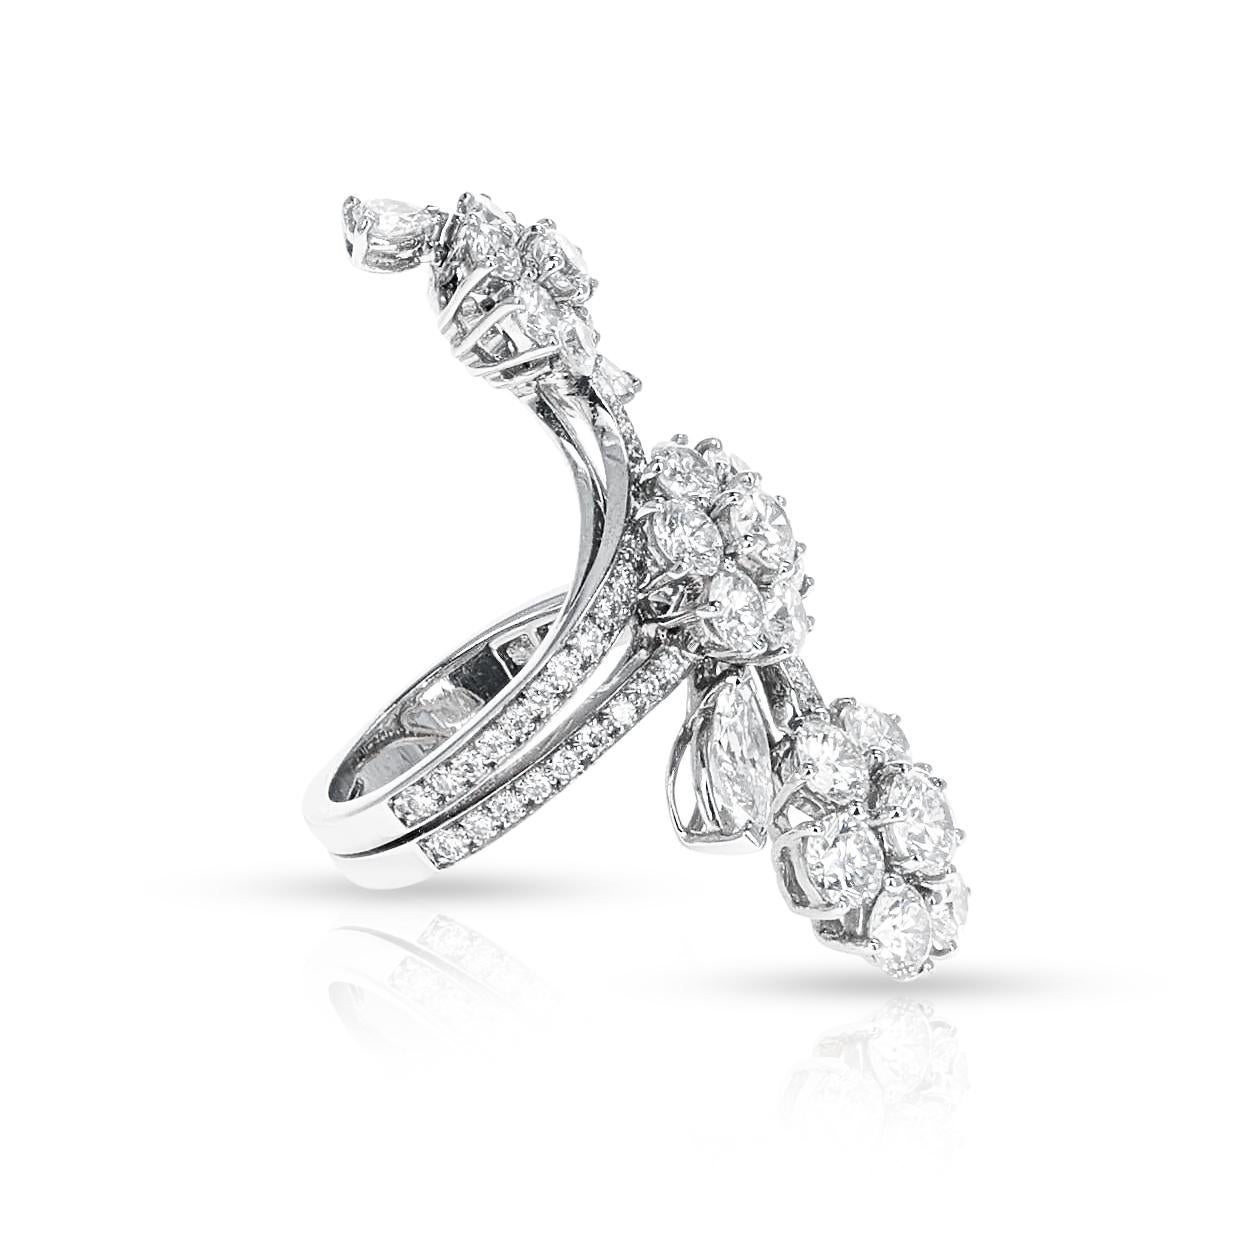 A Van Cleef & Arpels Folie Des Pres Ring. There are pear, marquise and round shape diamonds in a floral-trio design. Made in 18k White gold. Ring Size US 6. Total weight 10.25 grams.

SKU: 1164